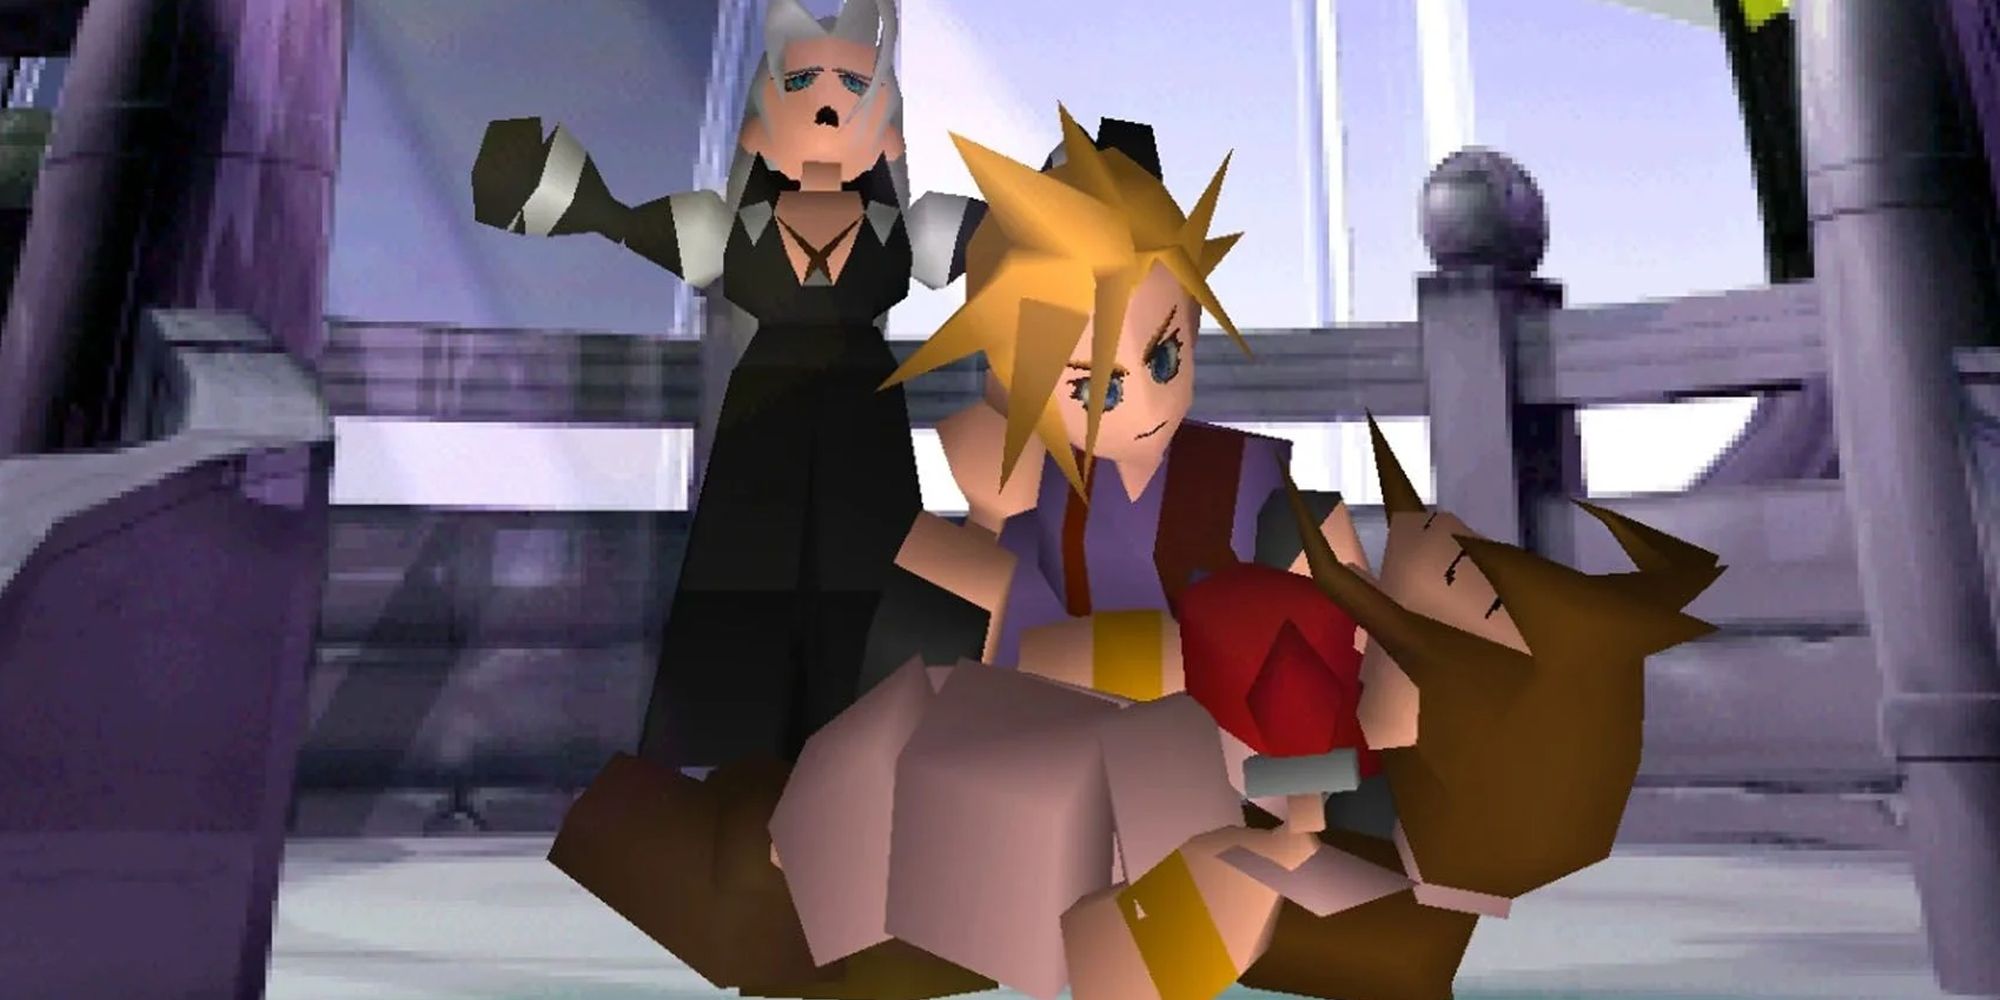 Cloud holding Aerith's body after Sephiroth stabs her